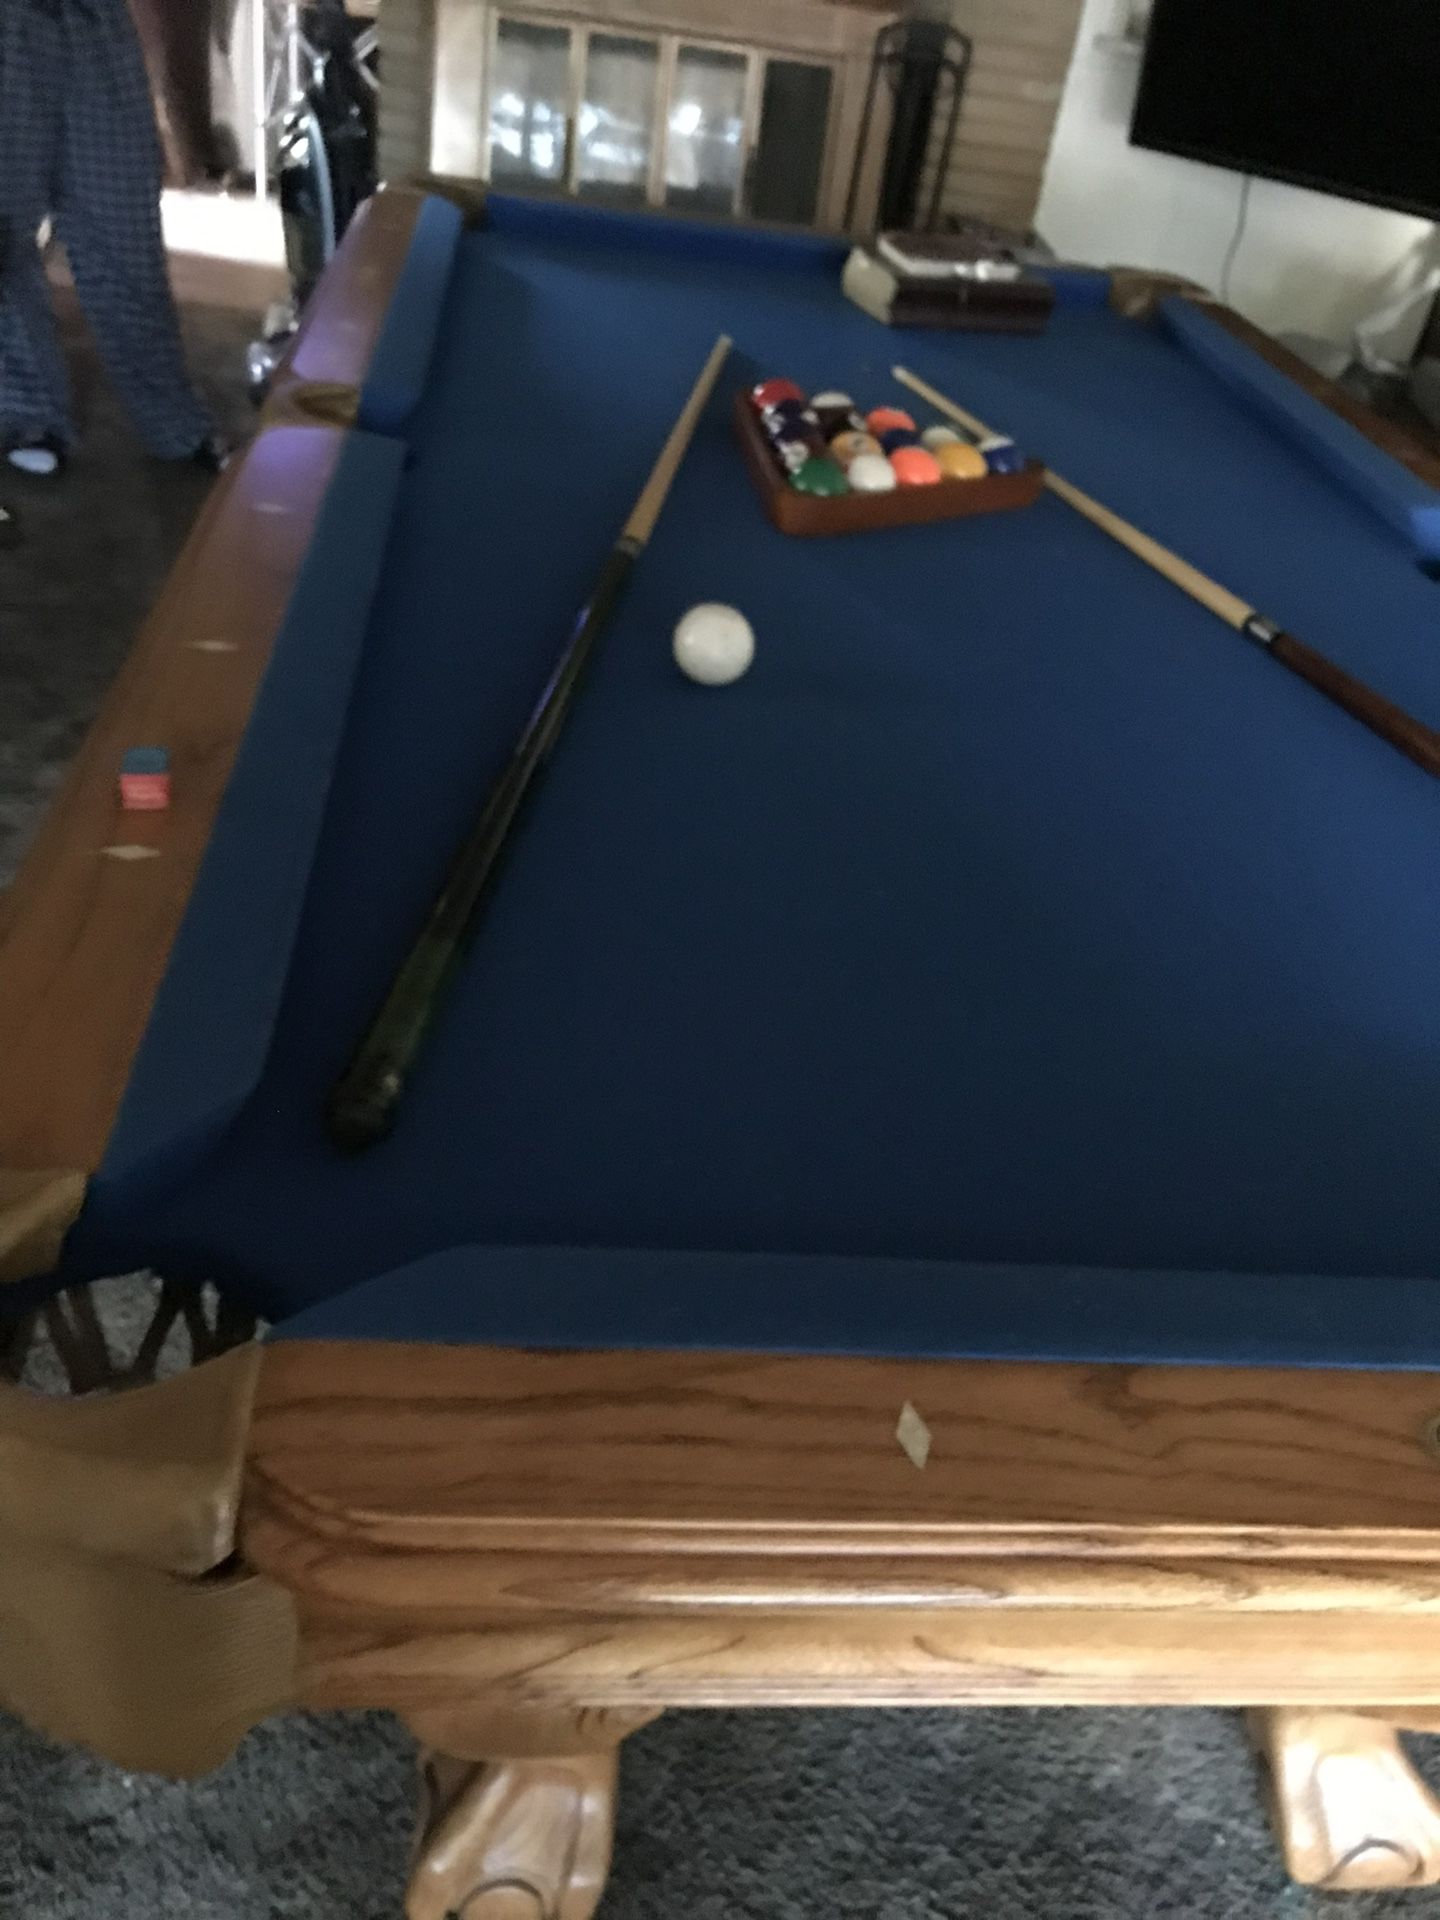 7ft Pool Table 